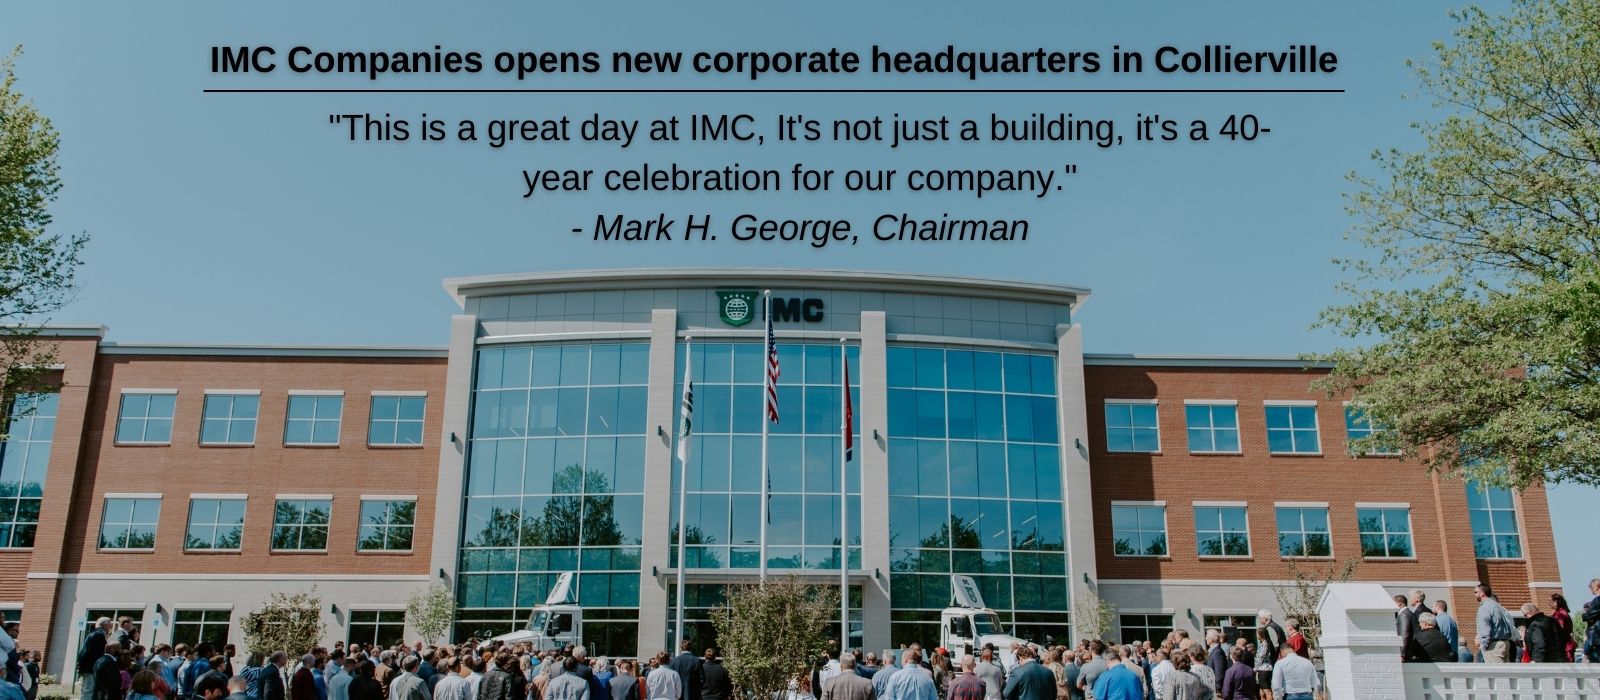 IMC Opens New Corporate Headquarters in Collierville